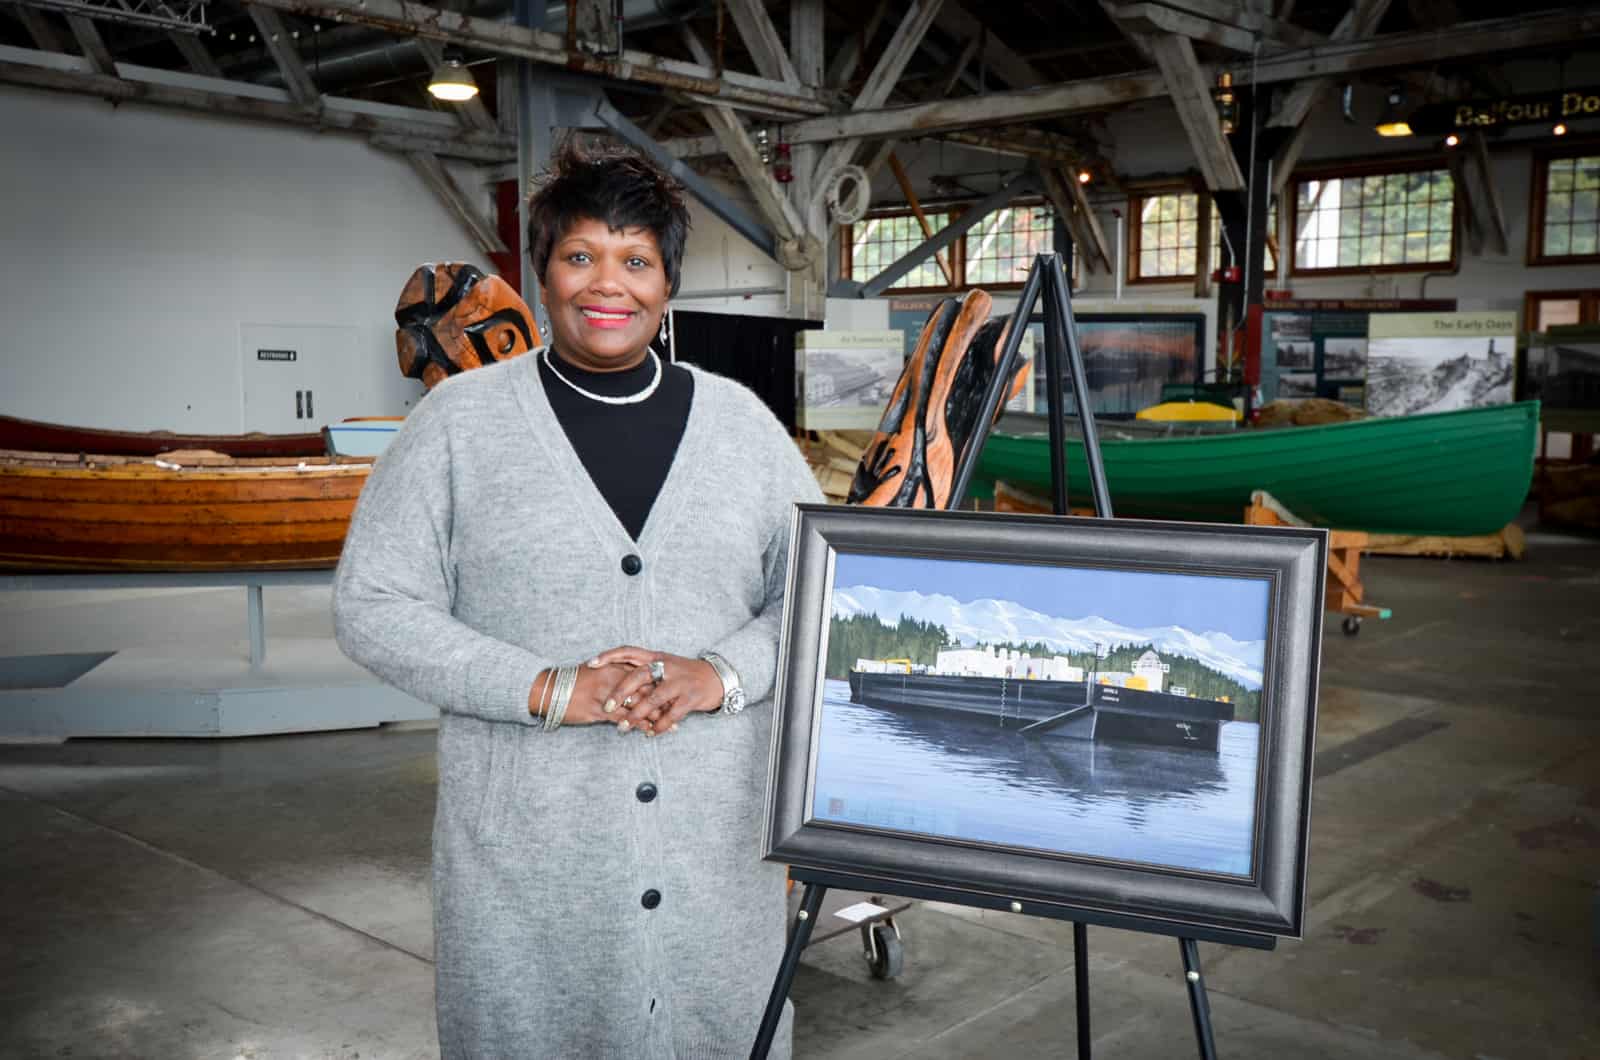 Benita stands next to a painting of the Antril S. in the Foss Waterway Seaport Museum in Tacoma